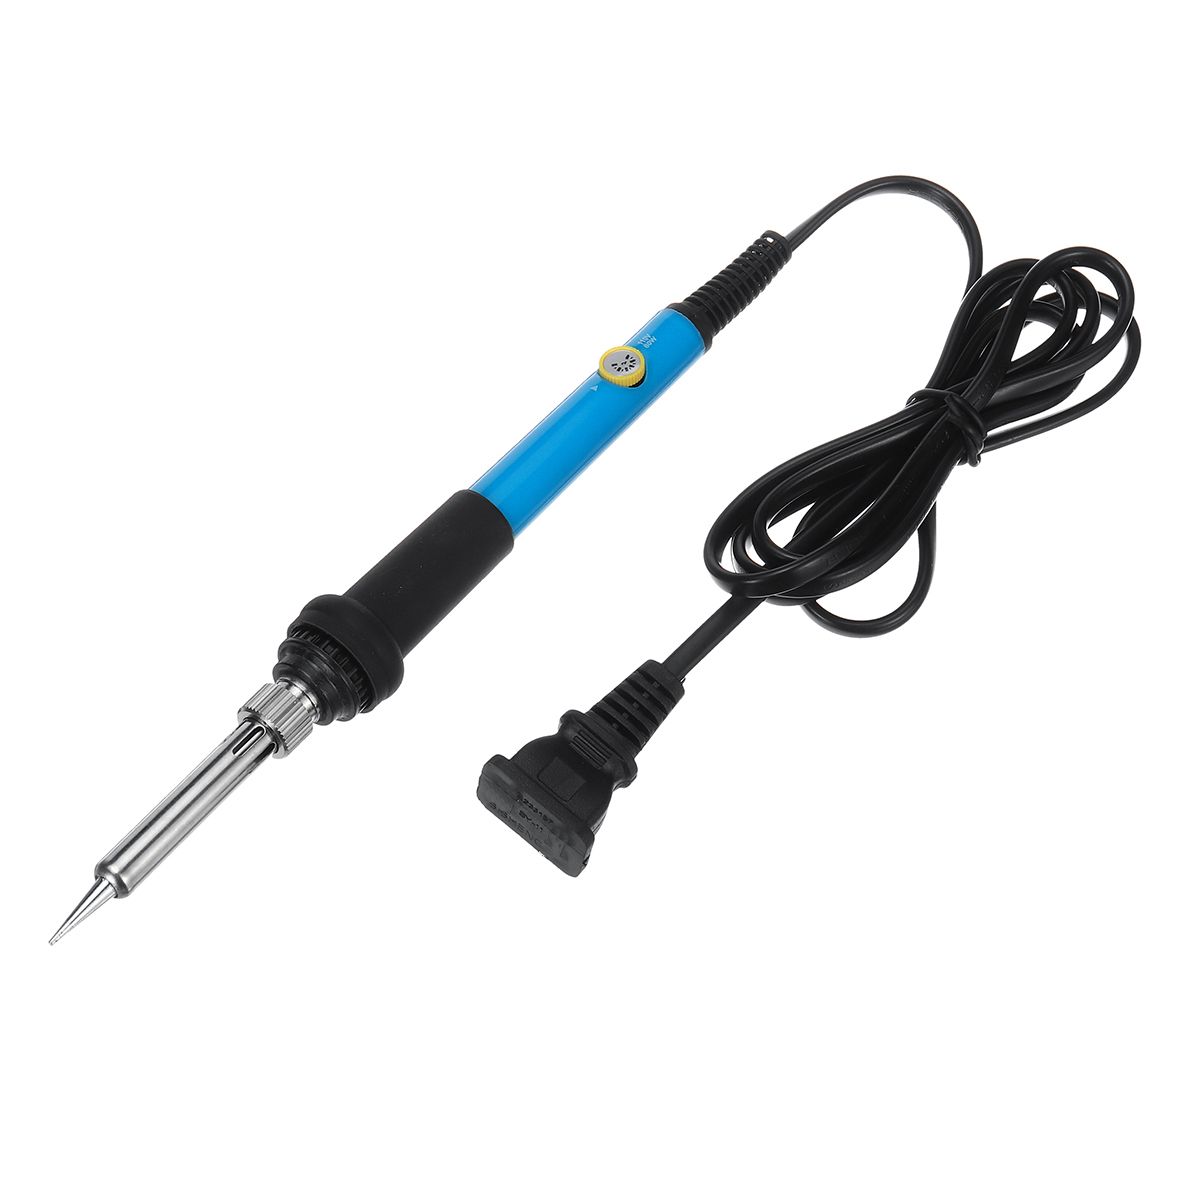 77Pcs-Electric-Soldering-Iron-Tools-Kit-60W-Temperature-Control--Welding-Station-Tip-Case-1618770